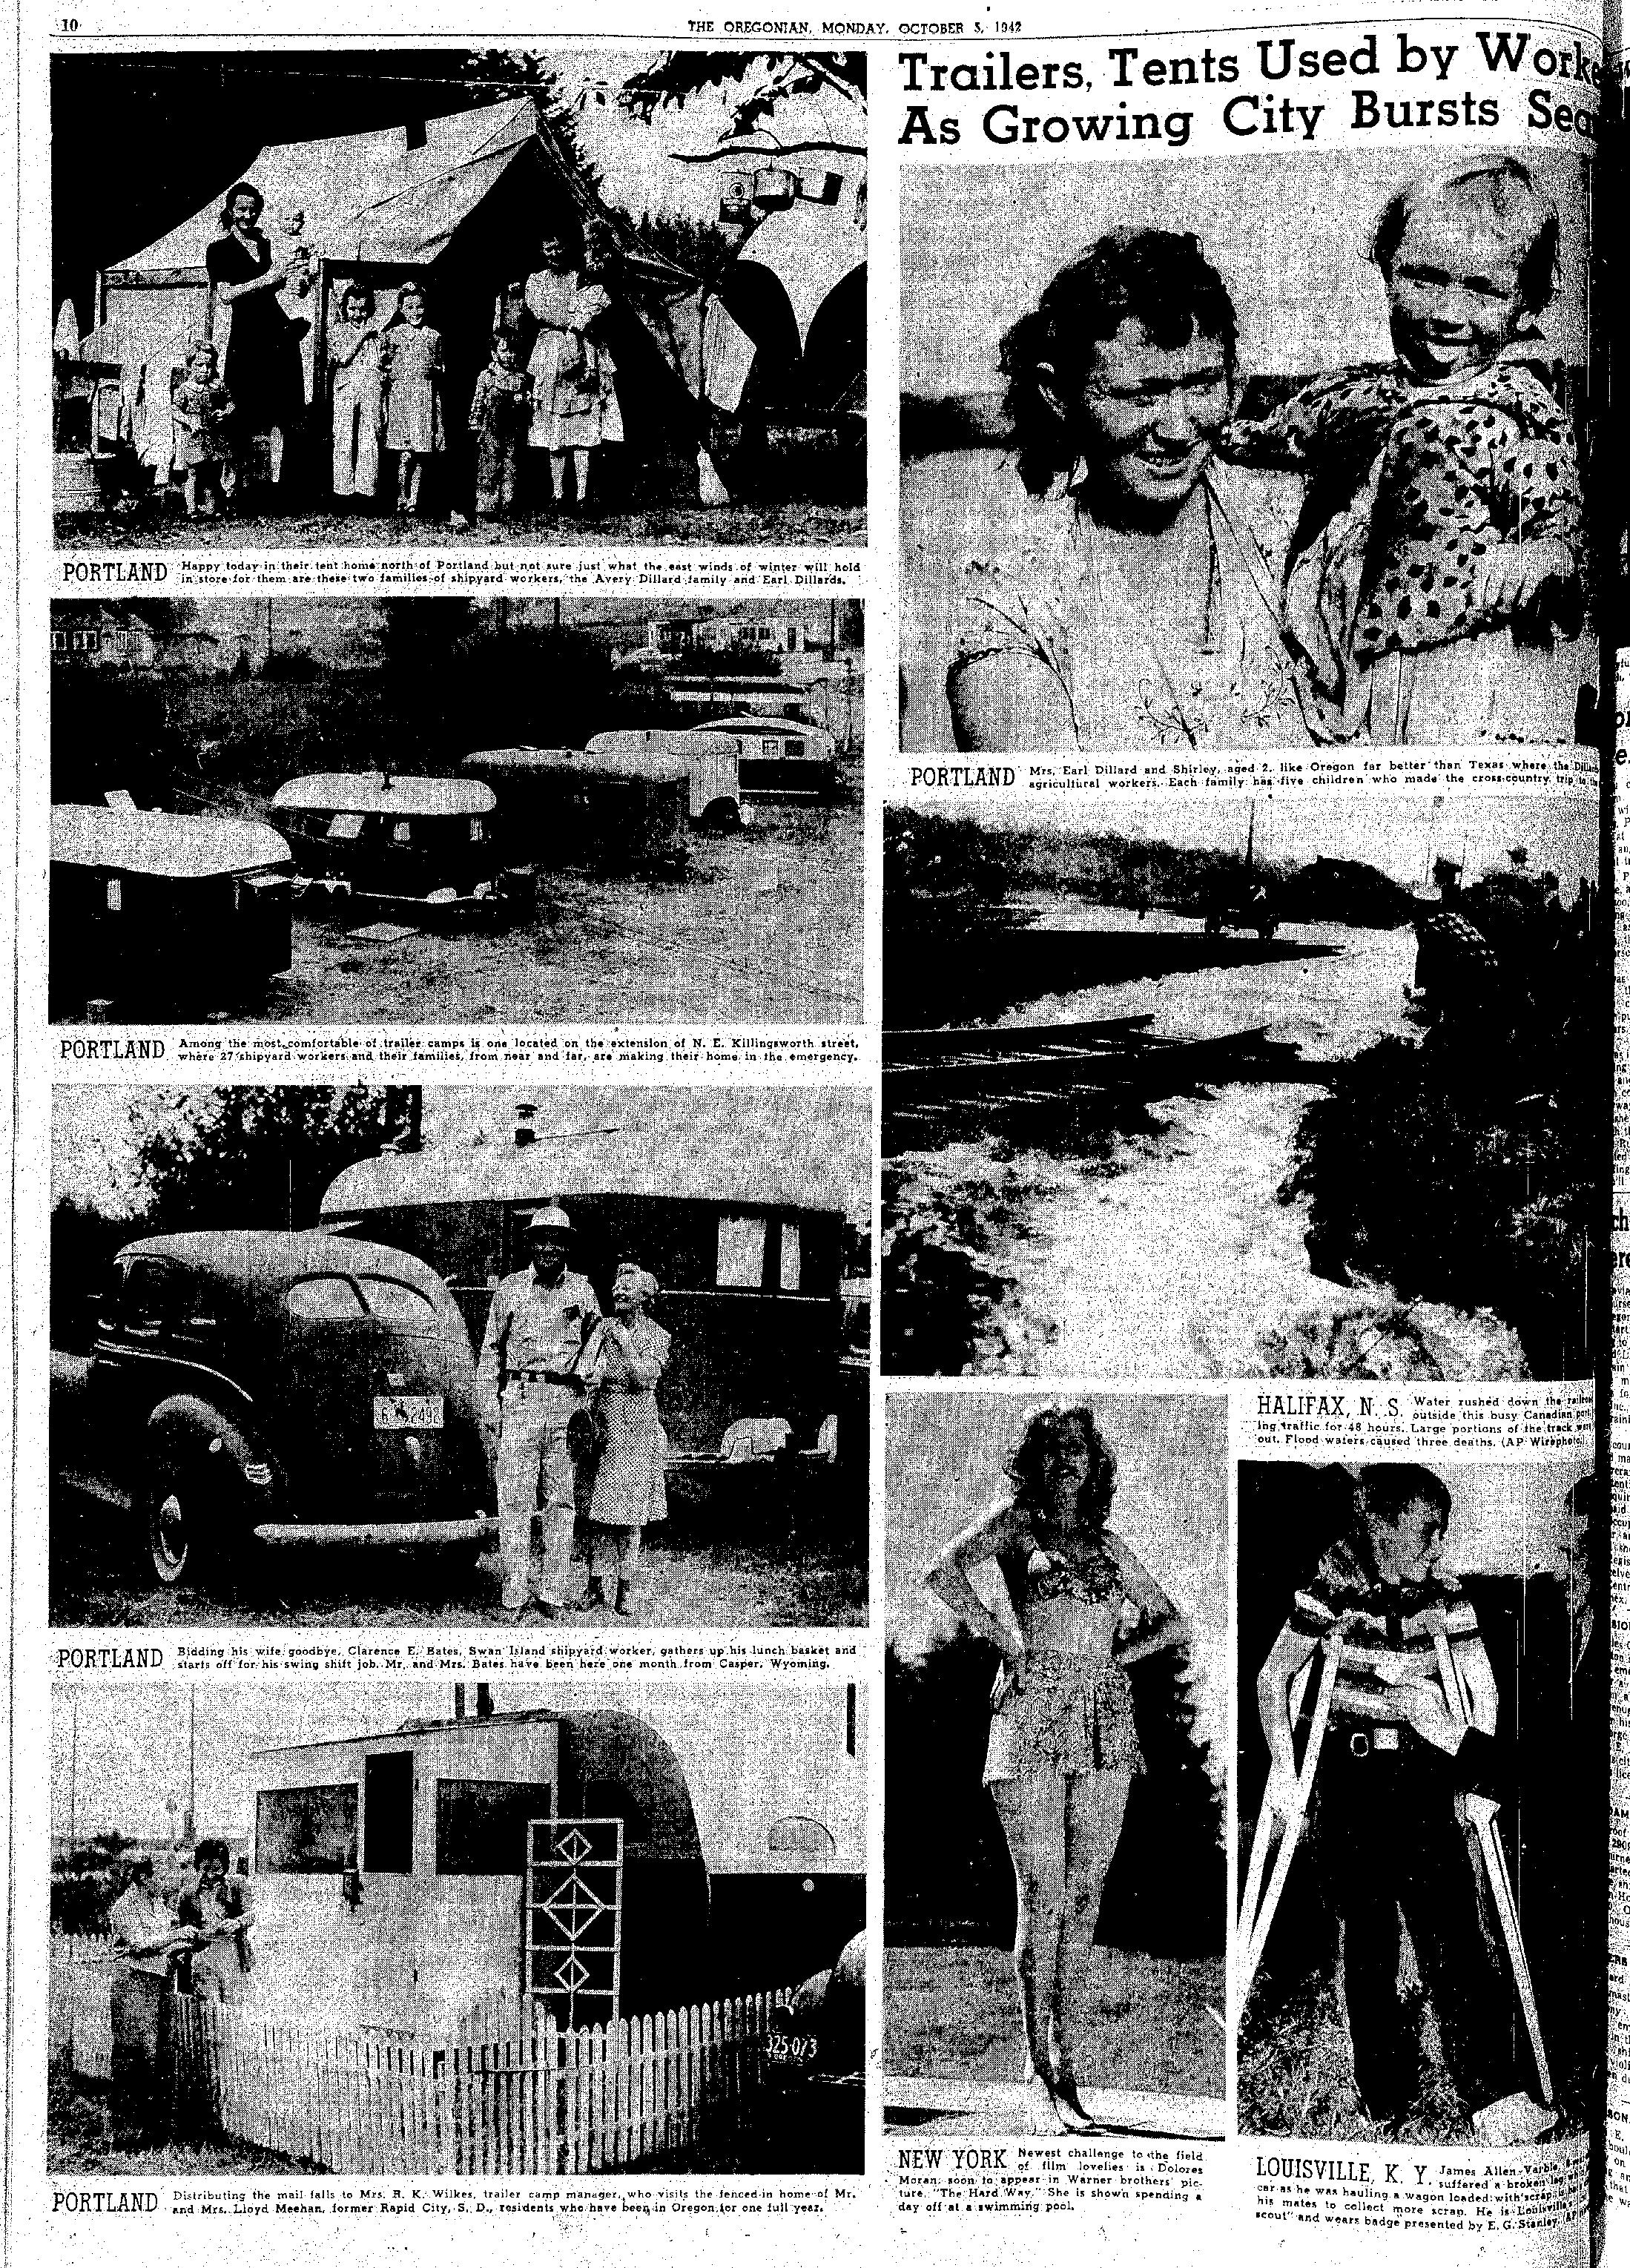 Oct 5 1942 Wartime trailers and camp-page-001